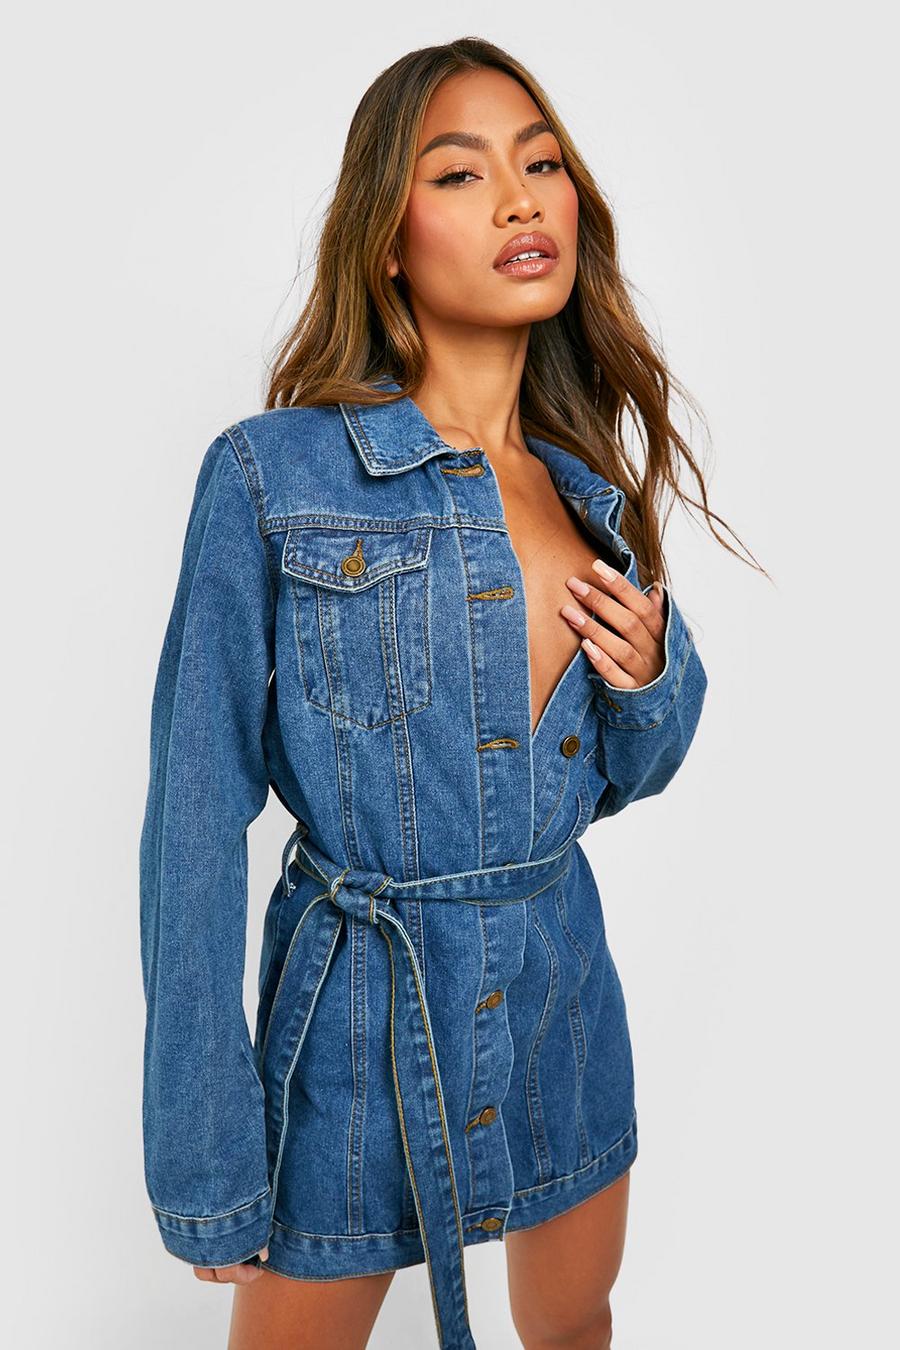 jean outfit womenThe Best Inexpensive Online Clothing Stores You May Want -  Clothing and Fashion